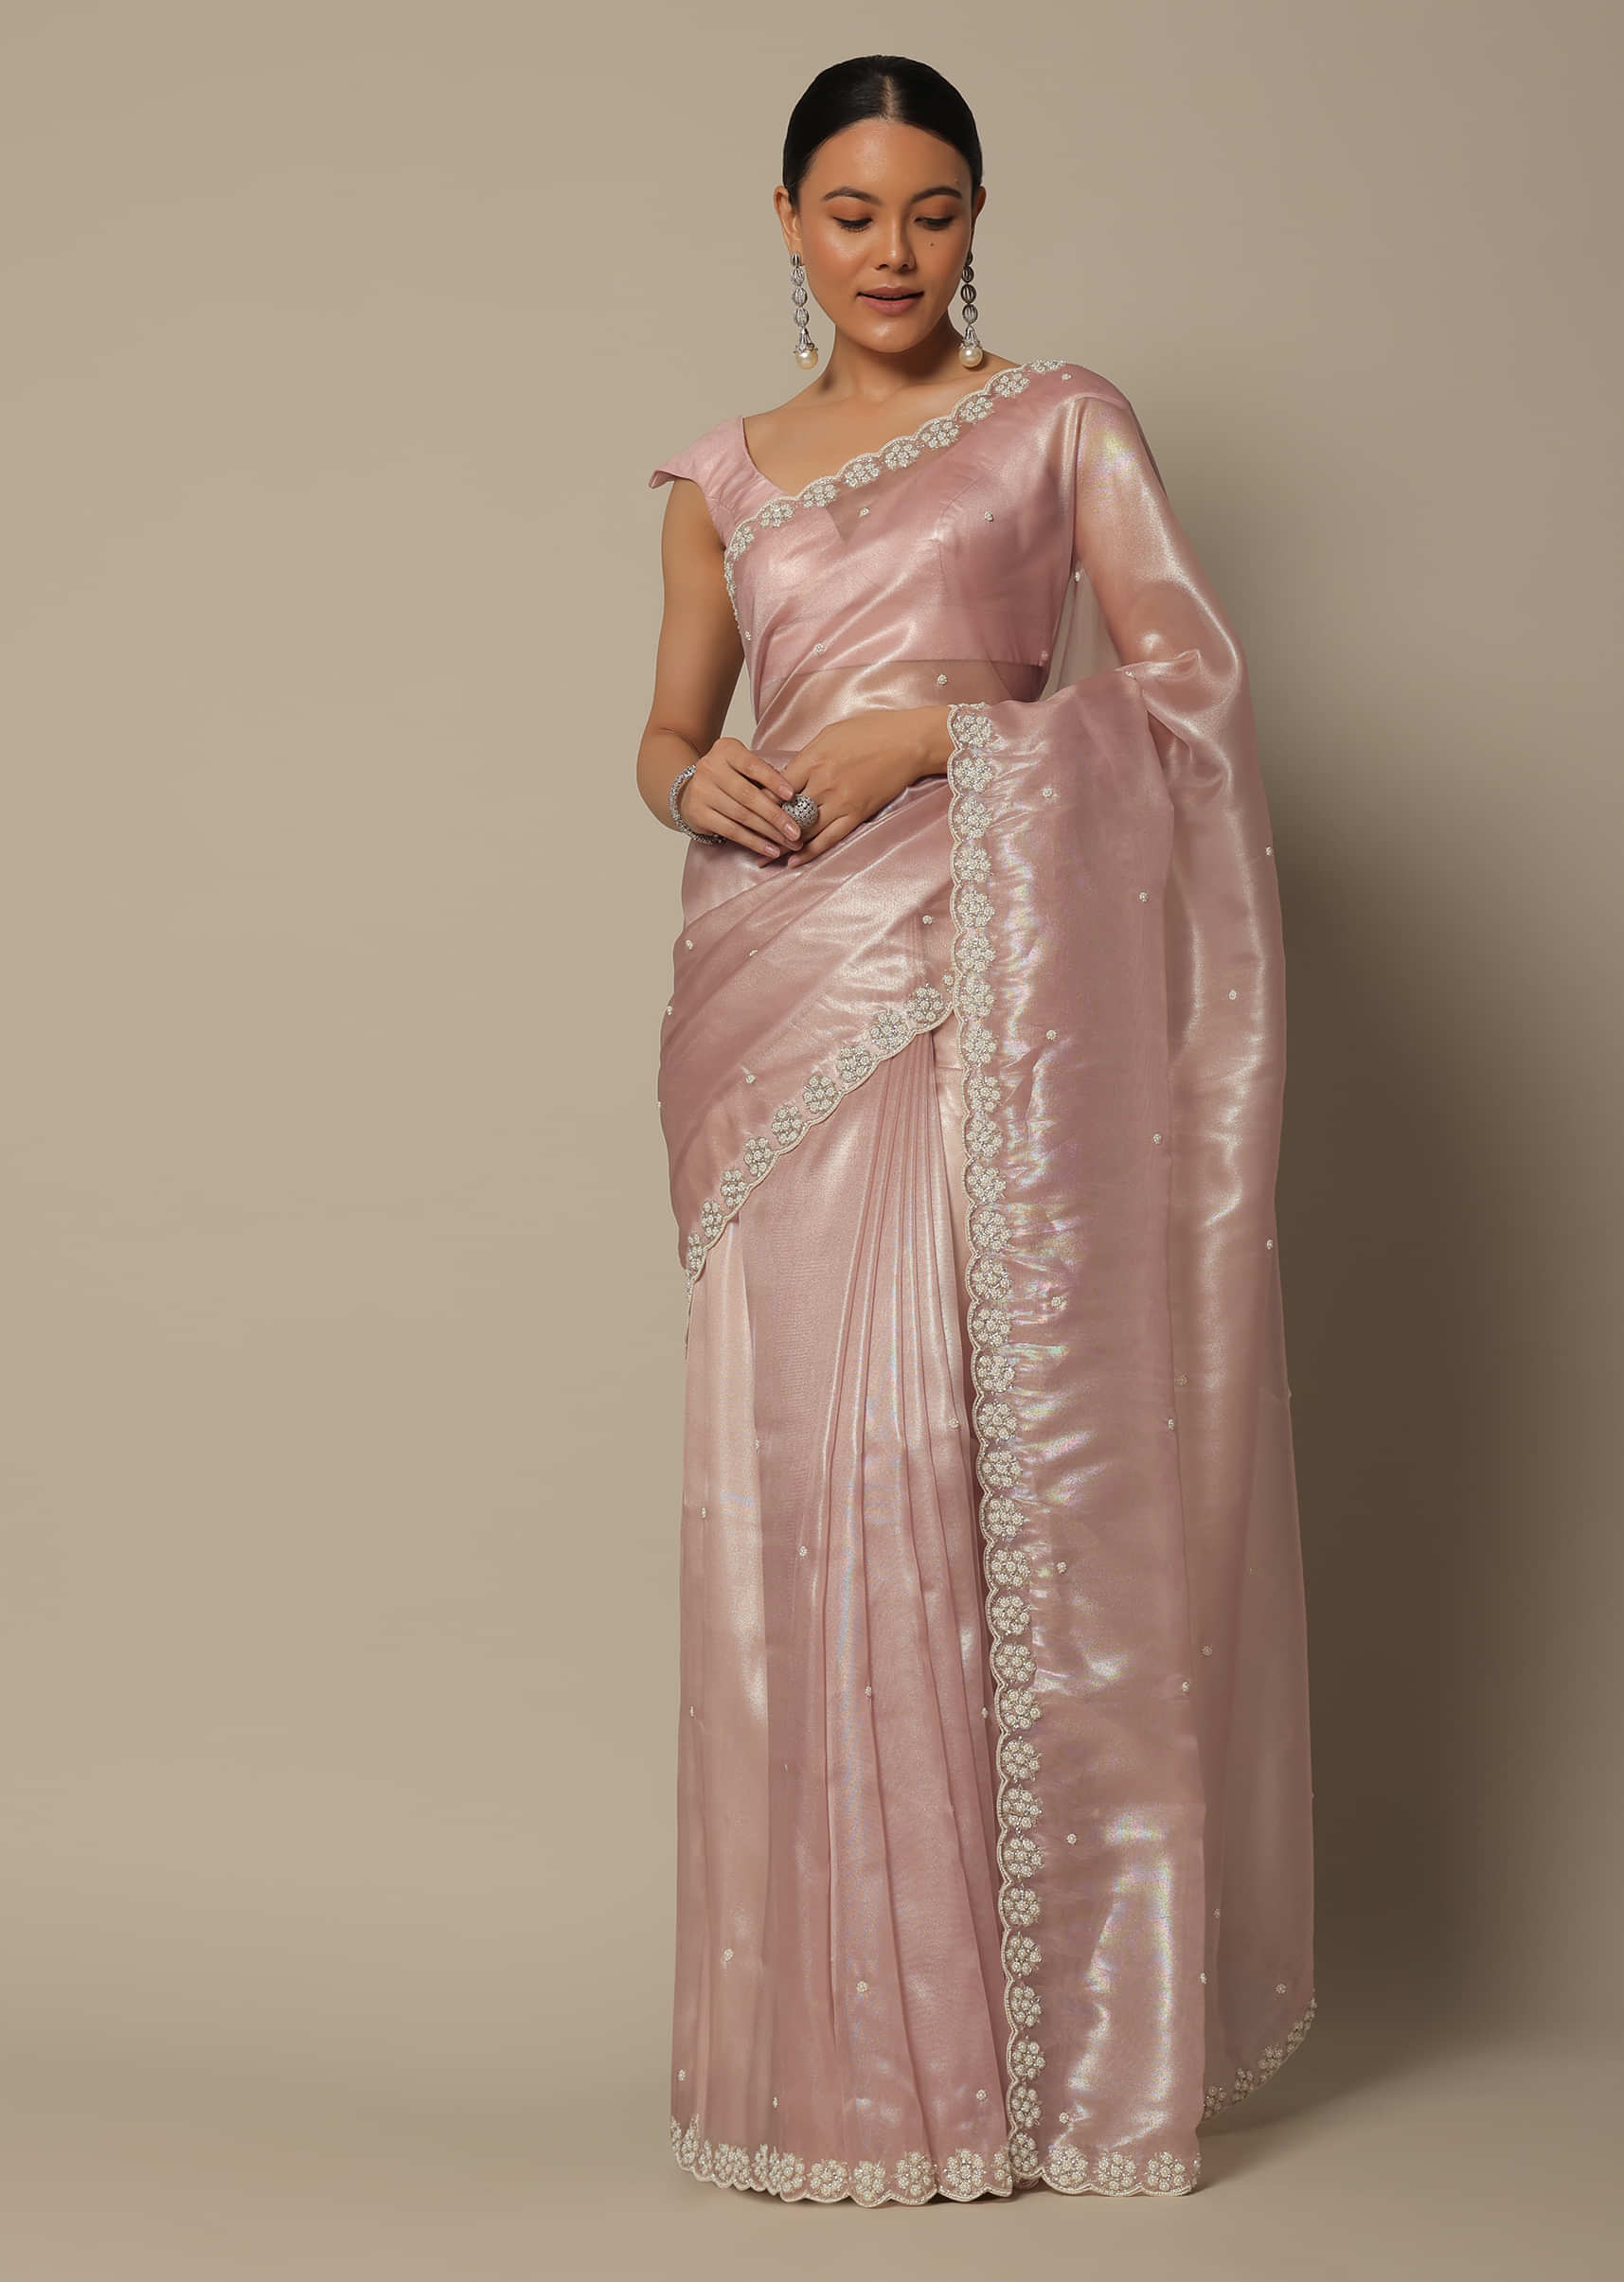 Women Poly Cotton Party Wear Saree By KALKI FASHION Sari Collection at Rs  750, Party Wear Saree in New Delhi